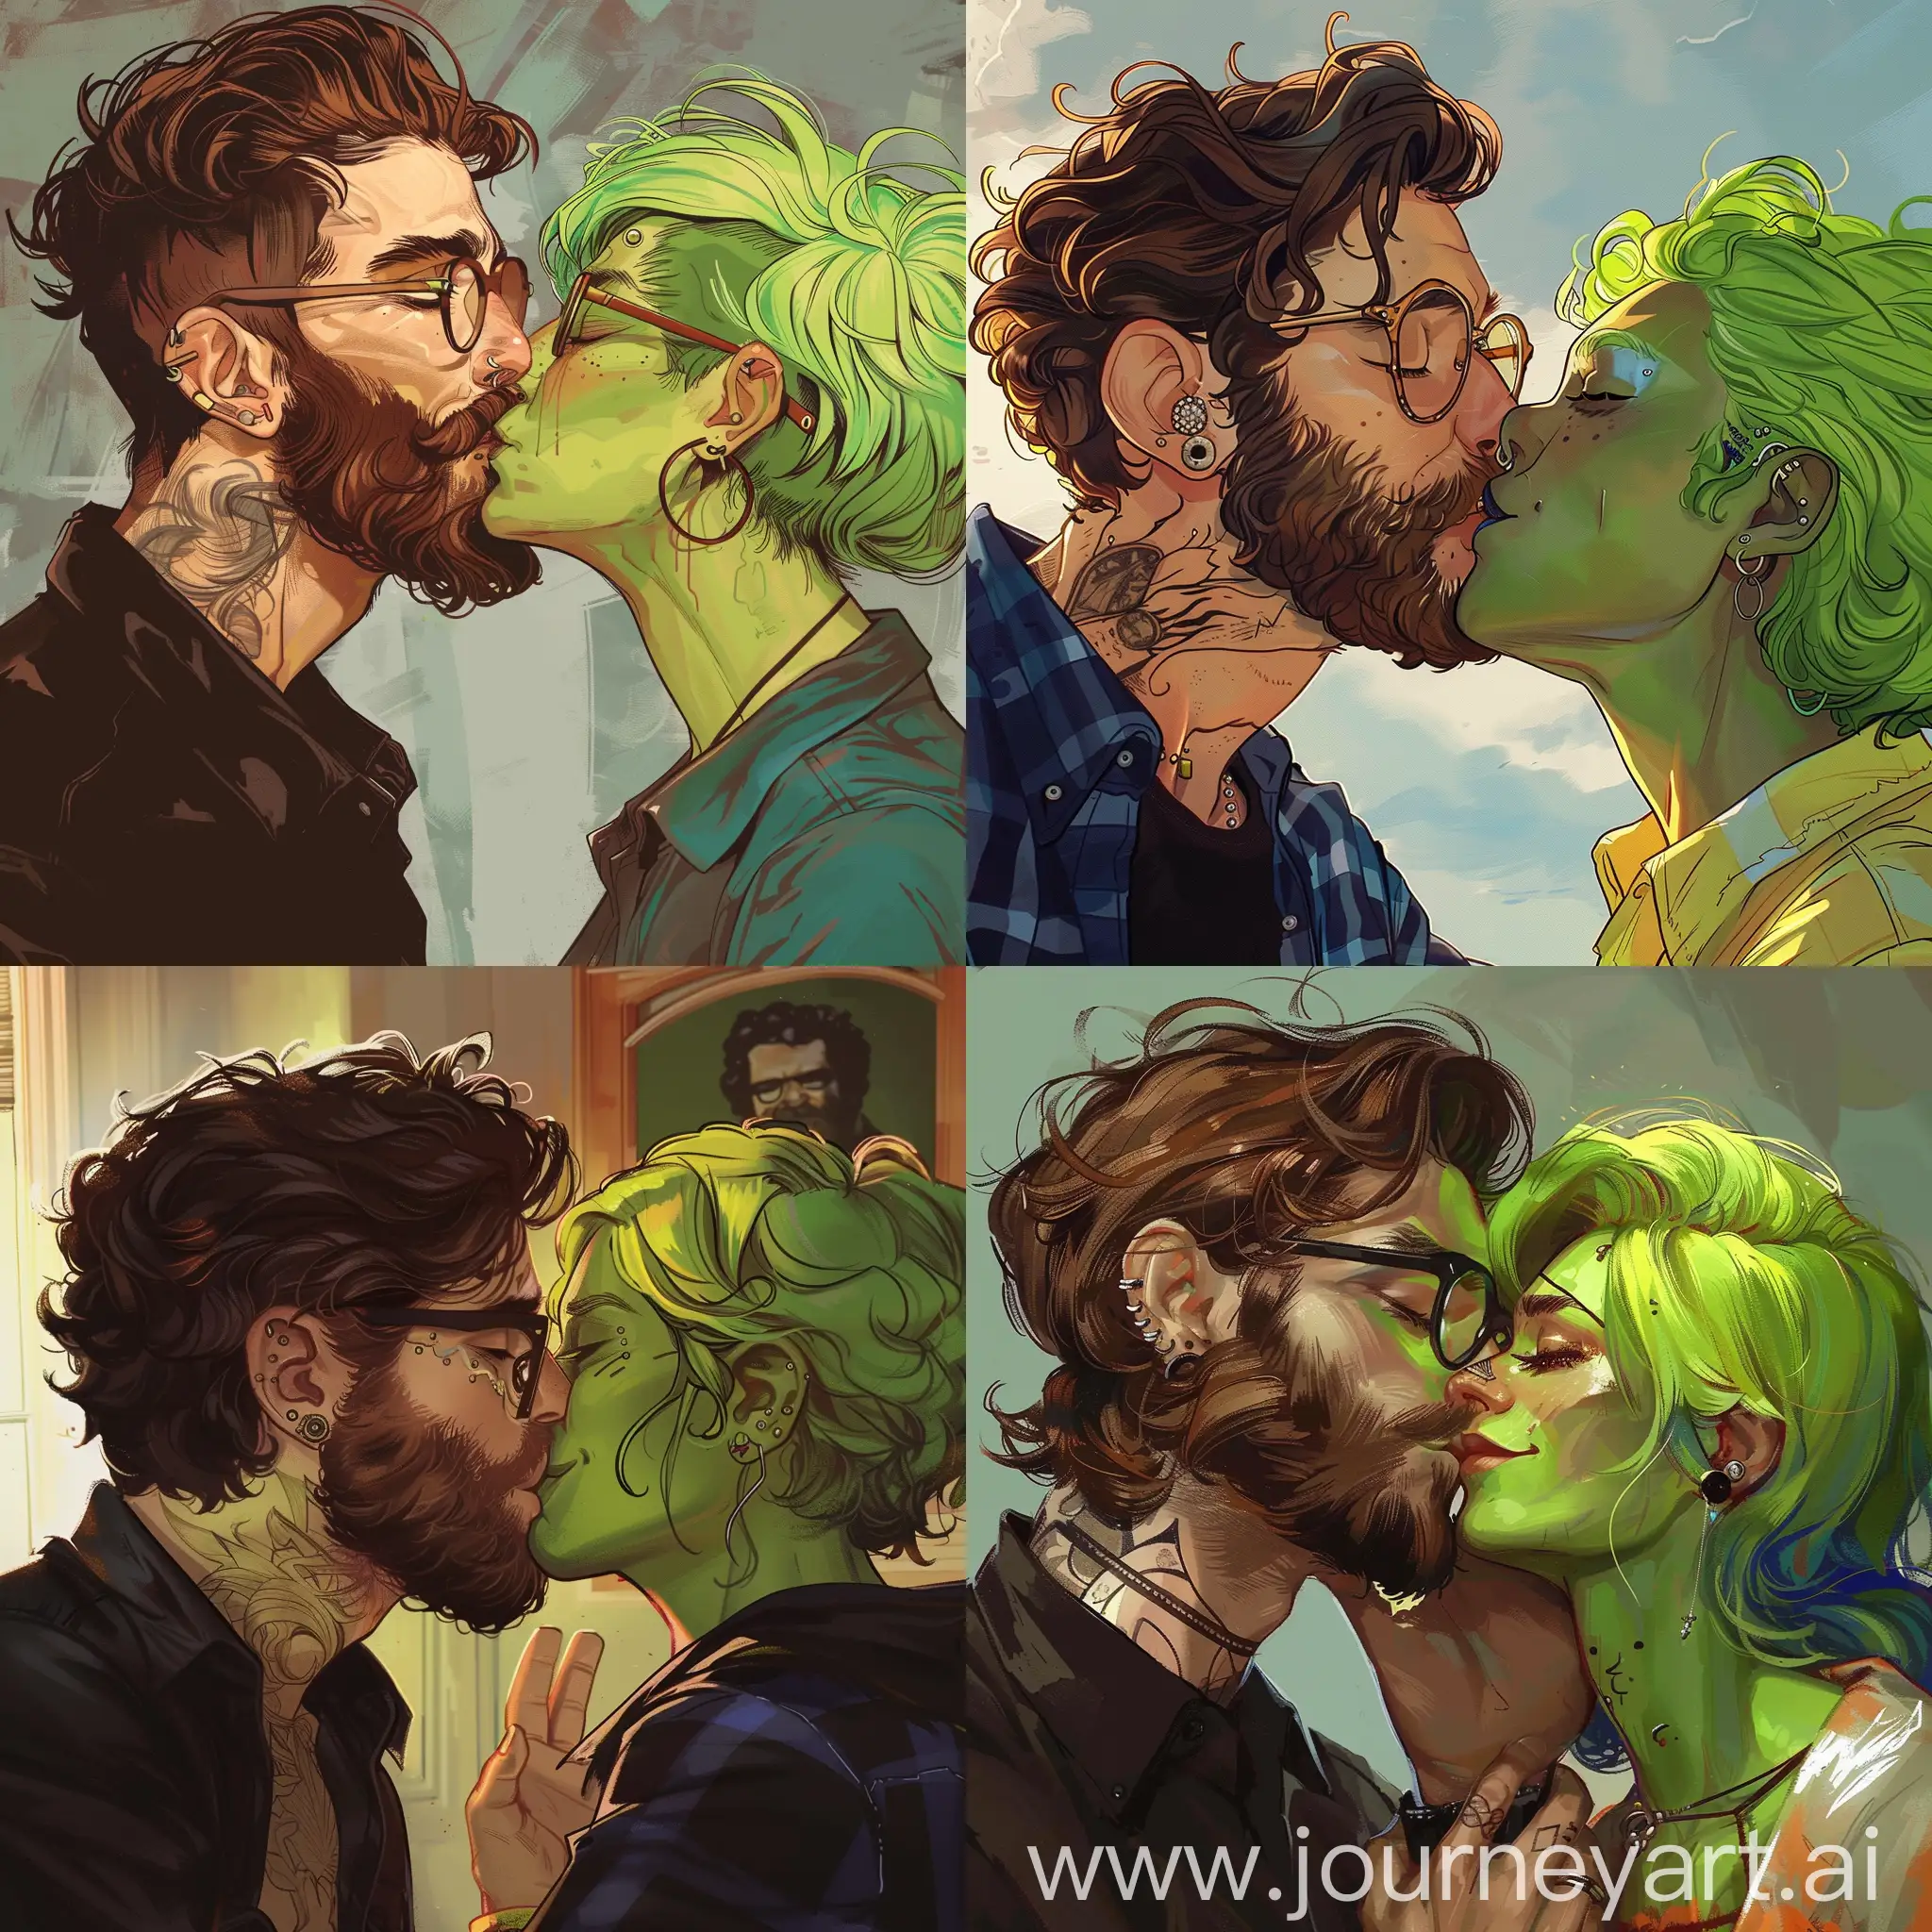 wavy haired brown beard glasses man kissing green haired liberal with piercings on face